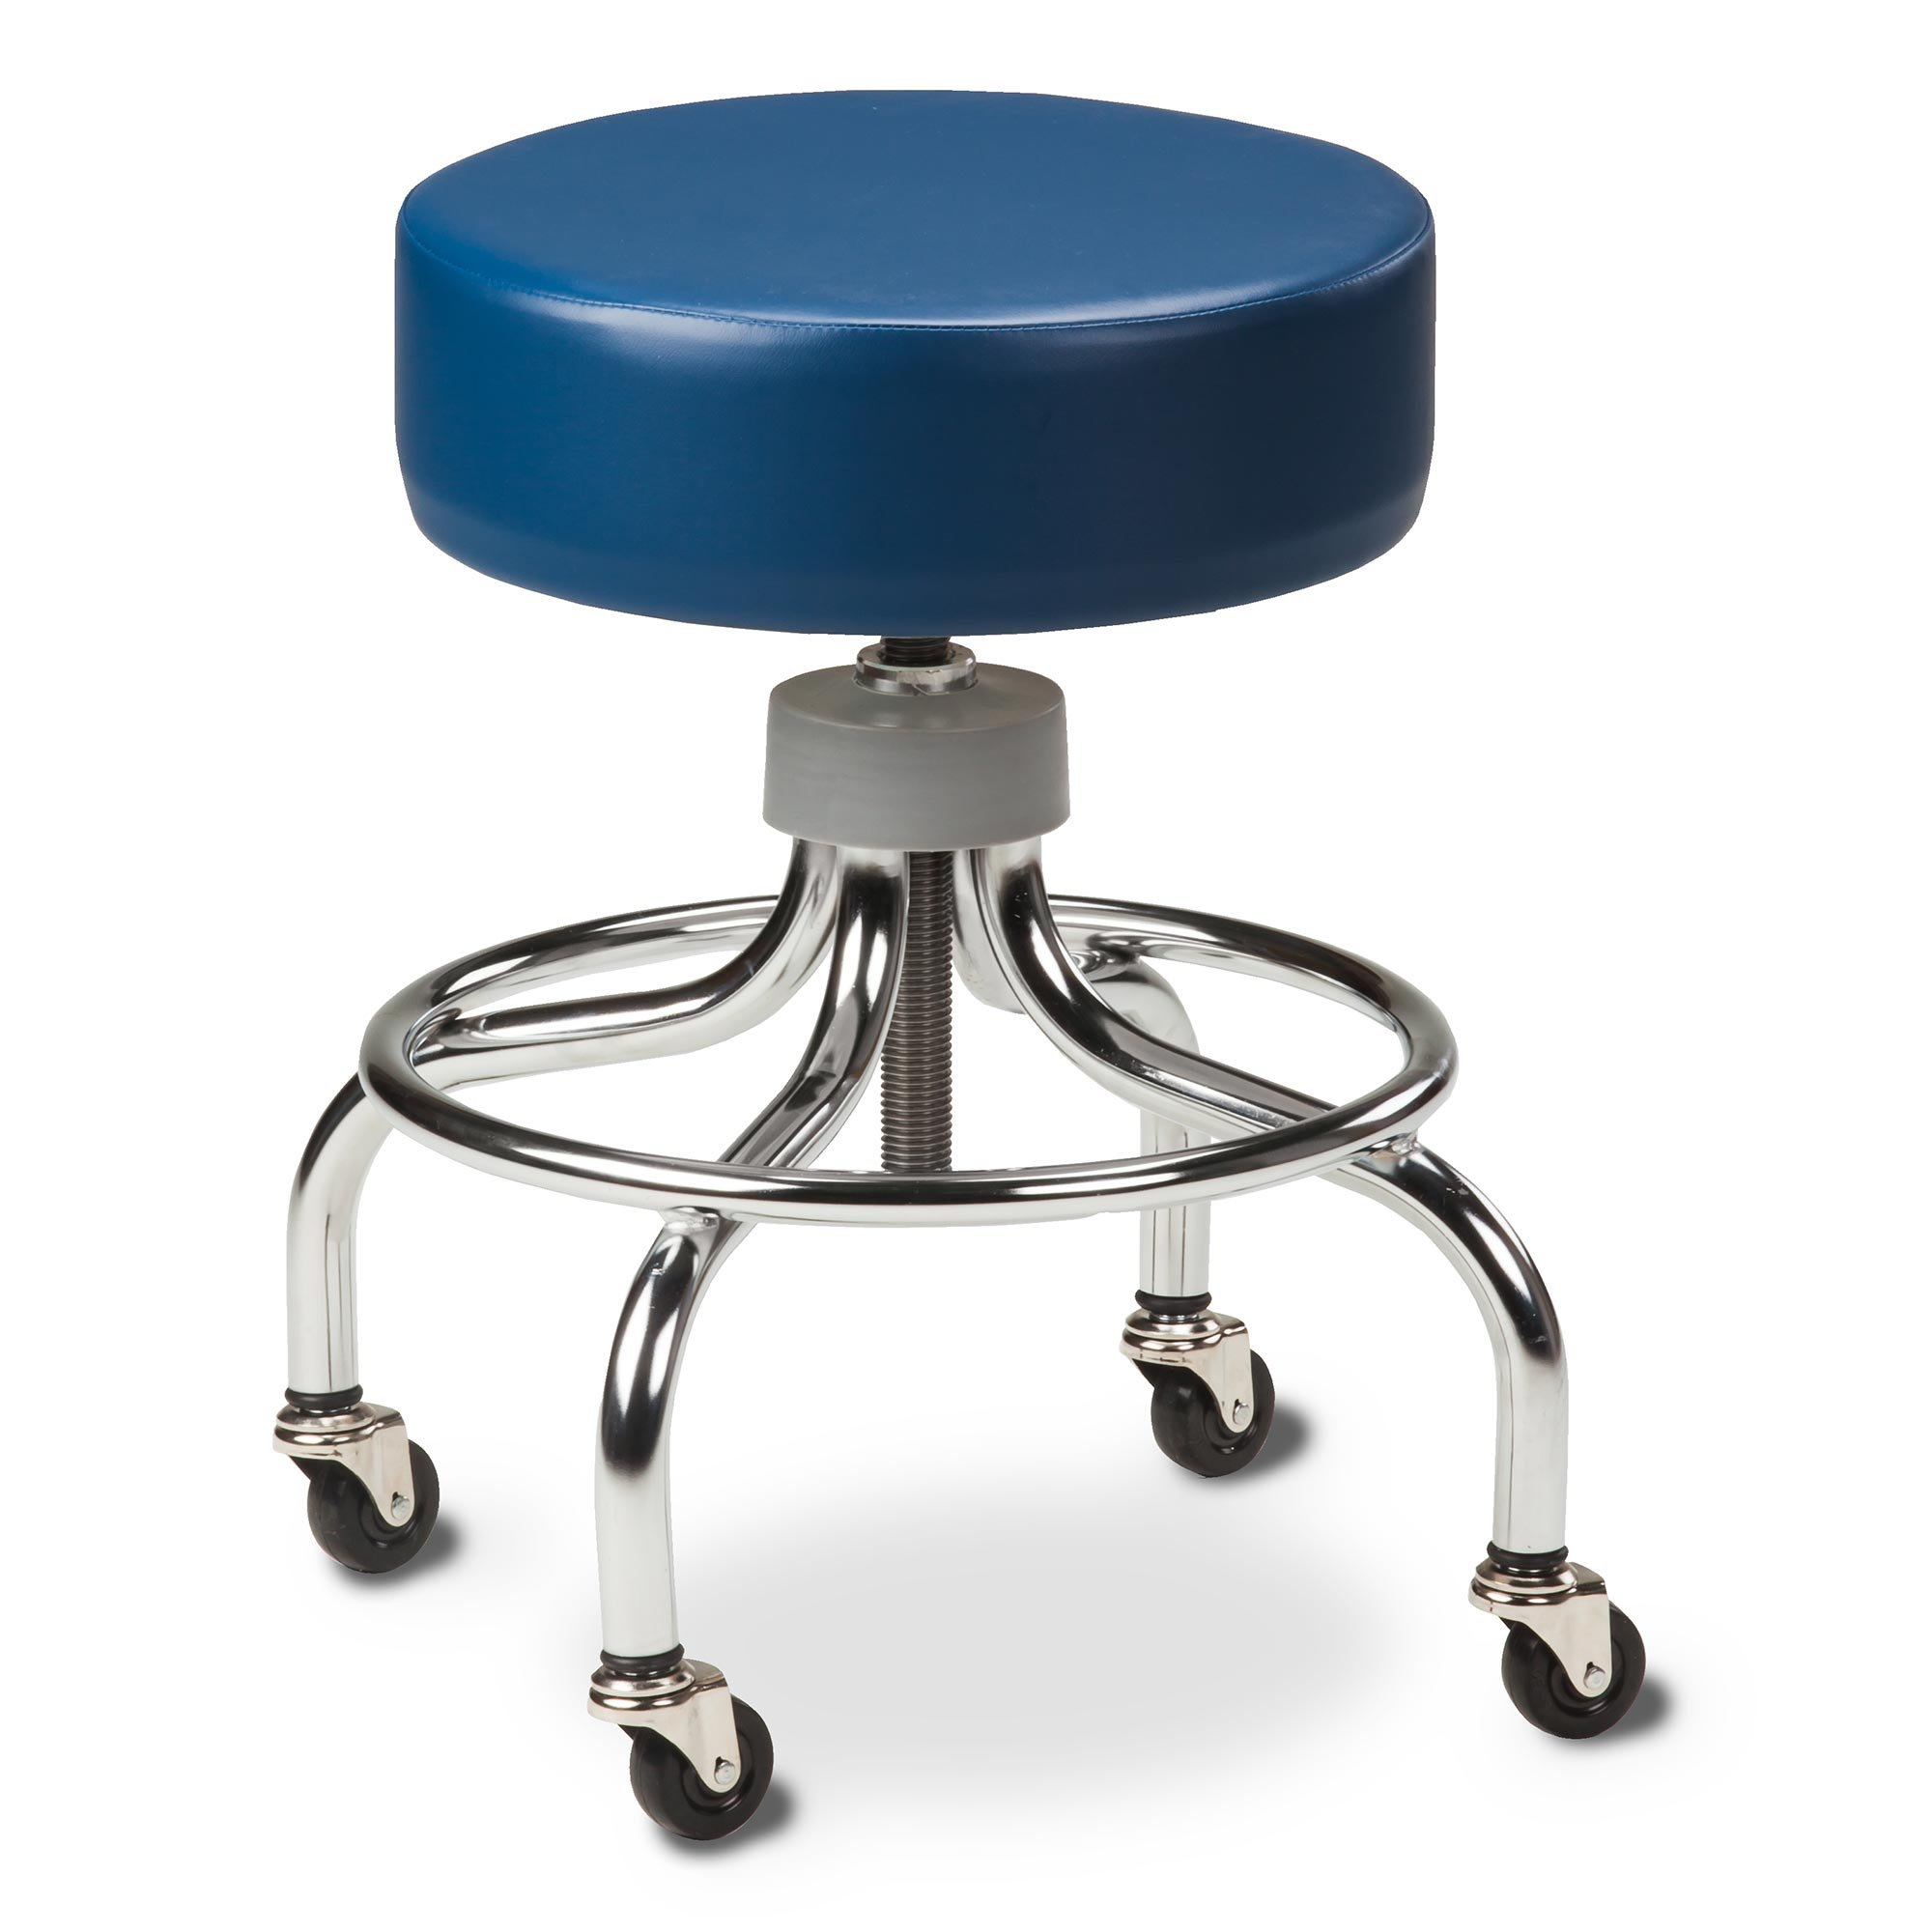 Generic Round Foot Fishing Stool Chair For Changing Shoes